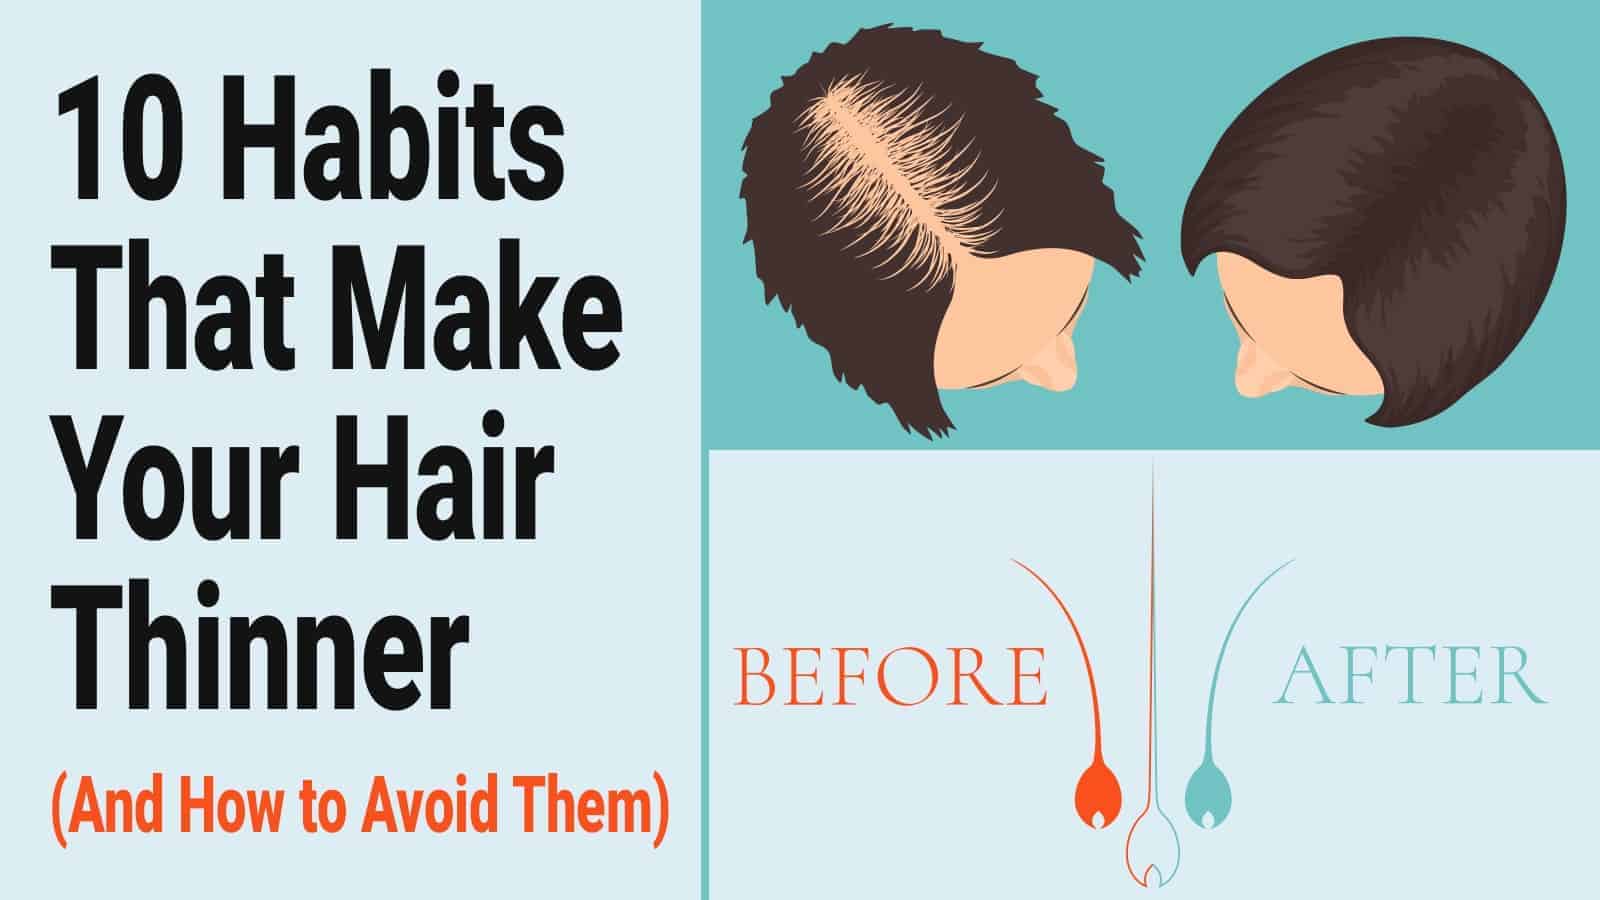 10 Habits That Make Your Hair Thinner (And How to Avoid Them)